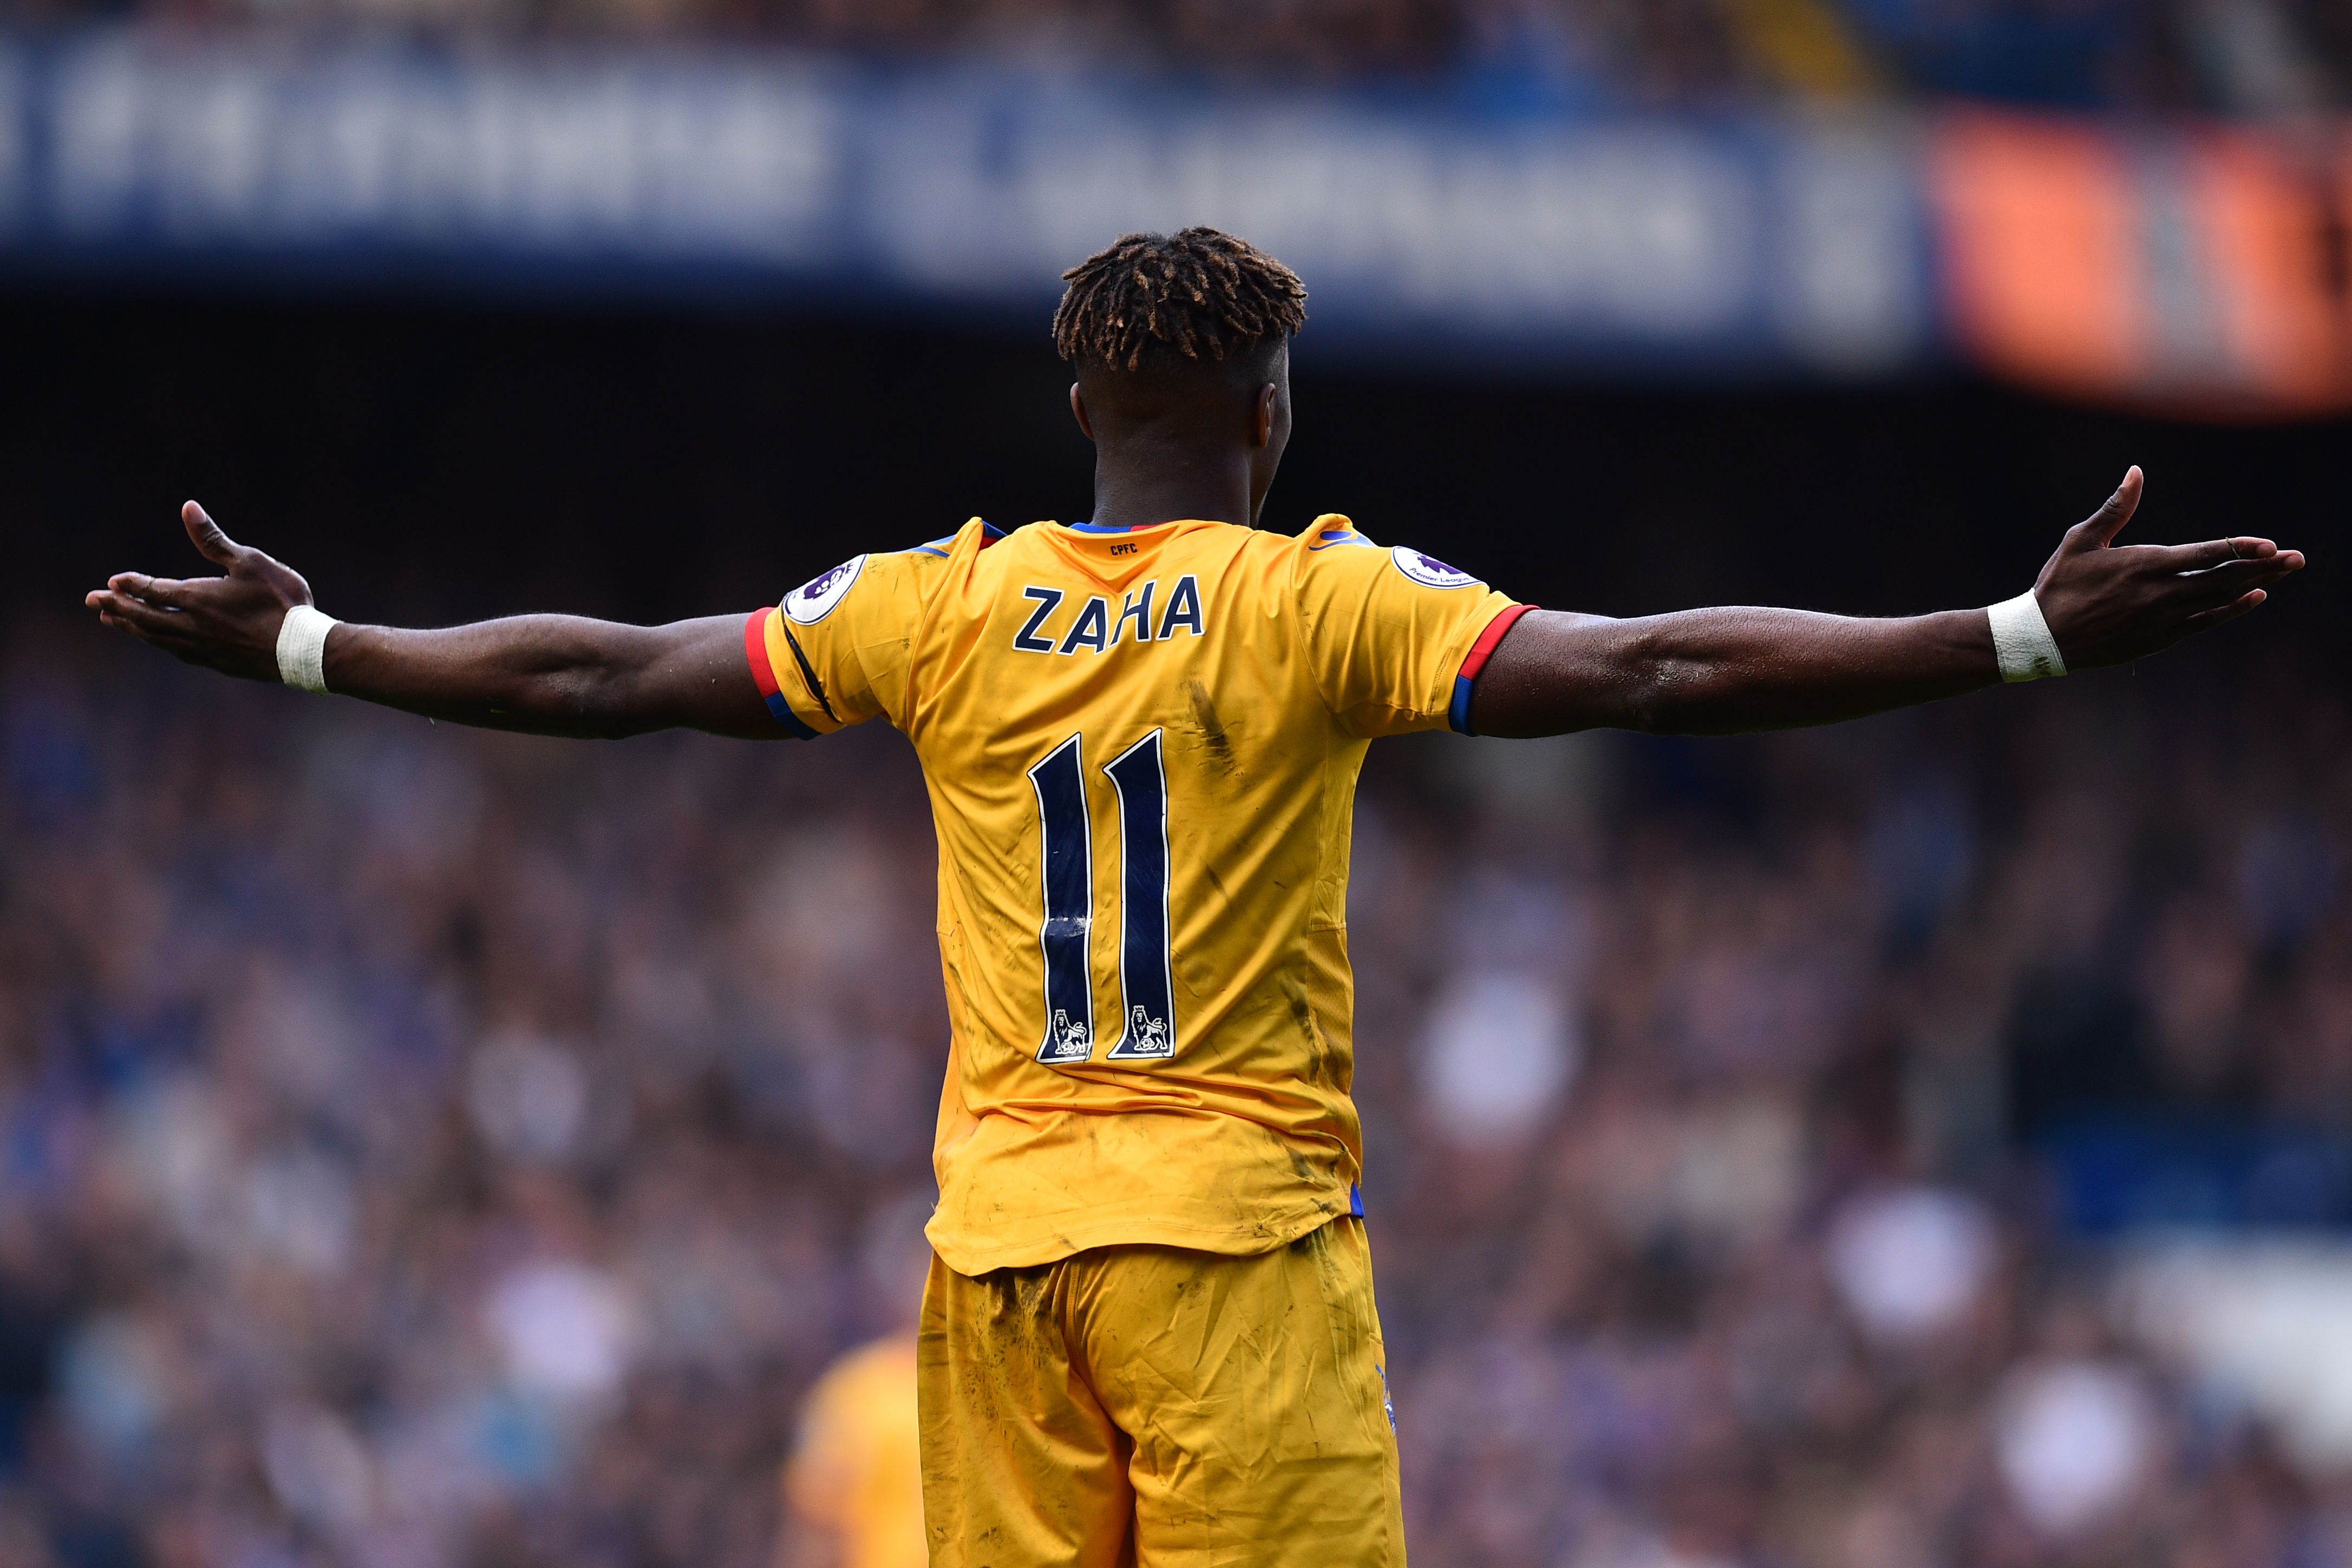 Crystal Palace's Ivorian-born English striker Wilfried Zaha gestures during the English Premier League football match between Chelsea and Crystal Palace at Stamford Bridge in London on April 1, 2017. / AFP PHOTO / Glyn KIRK / RESTRICTED TO EDITORIAL USE. No use with unauthorized audio, video, data, fixture lists, club/league logos or 'live' services. Online in-match use limited to 75 images, no video emulation. No use in betting, games or single club/league/player publications.  /         (Photo credit should read GLYN KIRK/AFP/Getty Images)